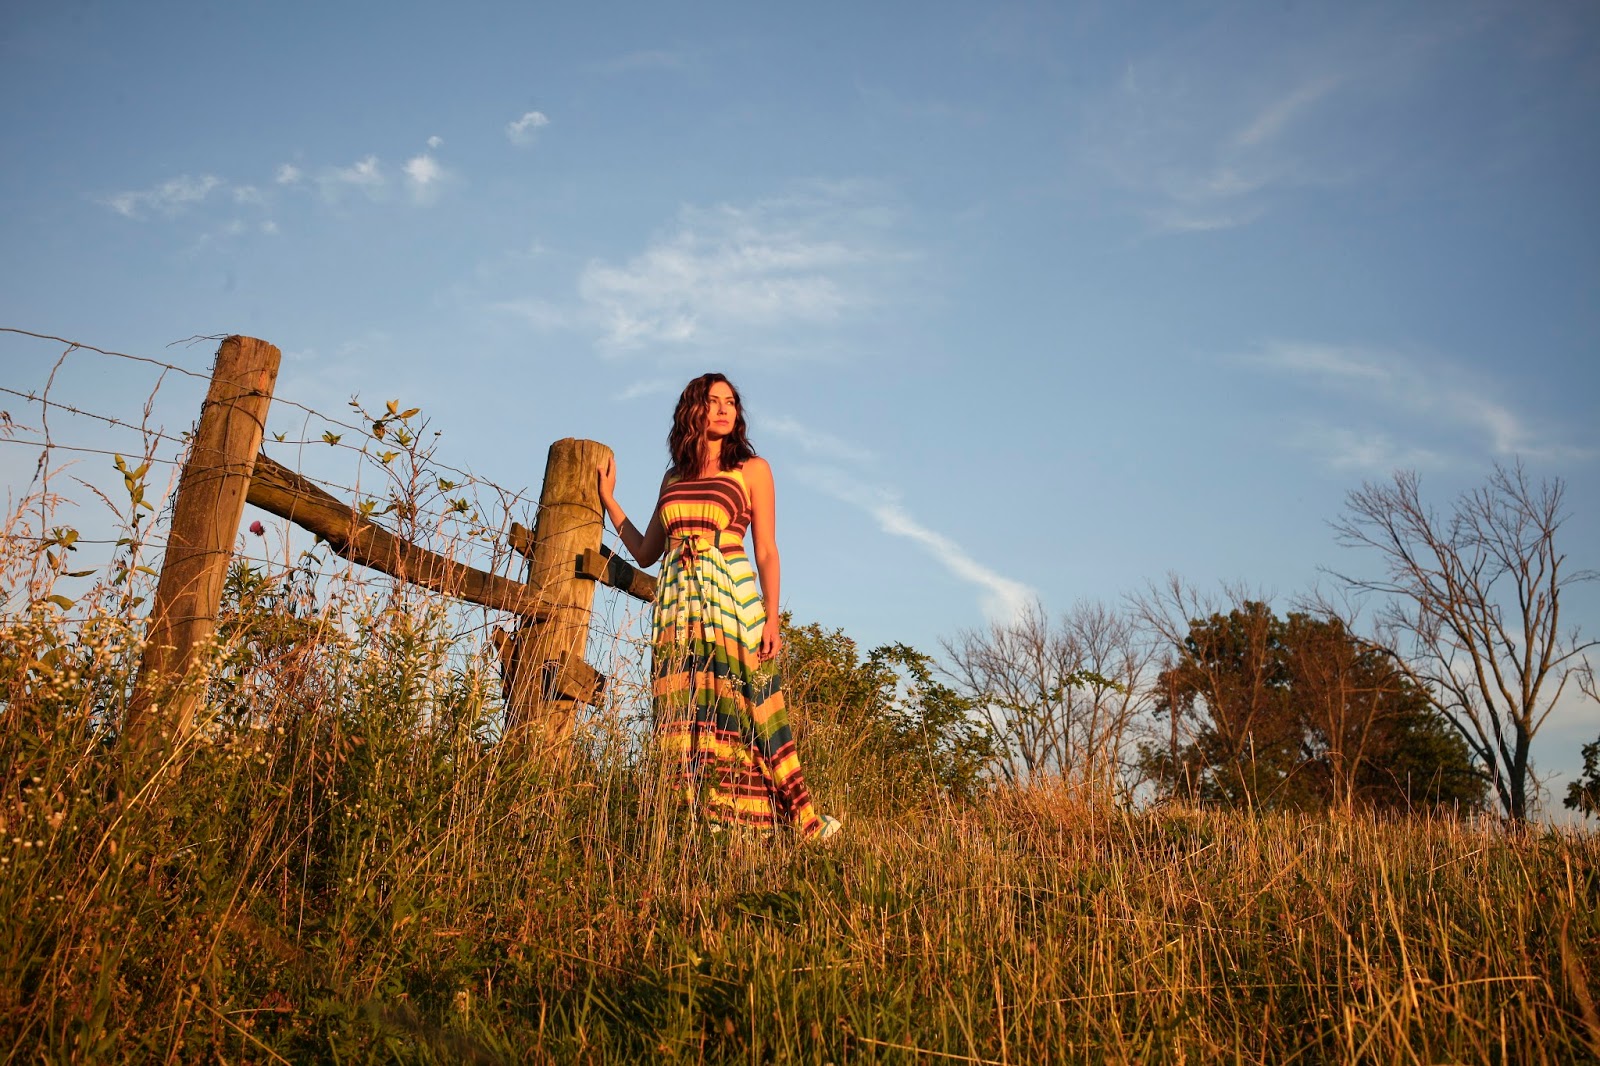 Amy West watches the sun set in this striped maxi dress on a farm in Kentucky